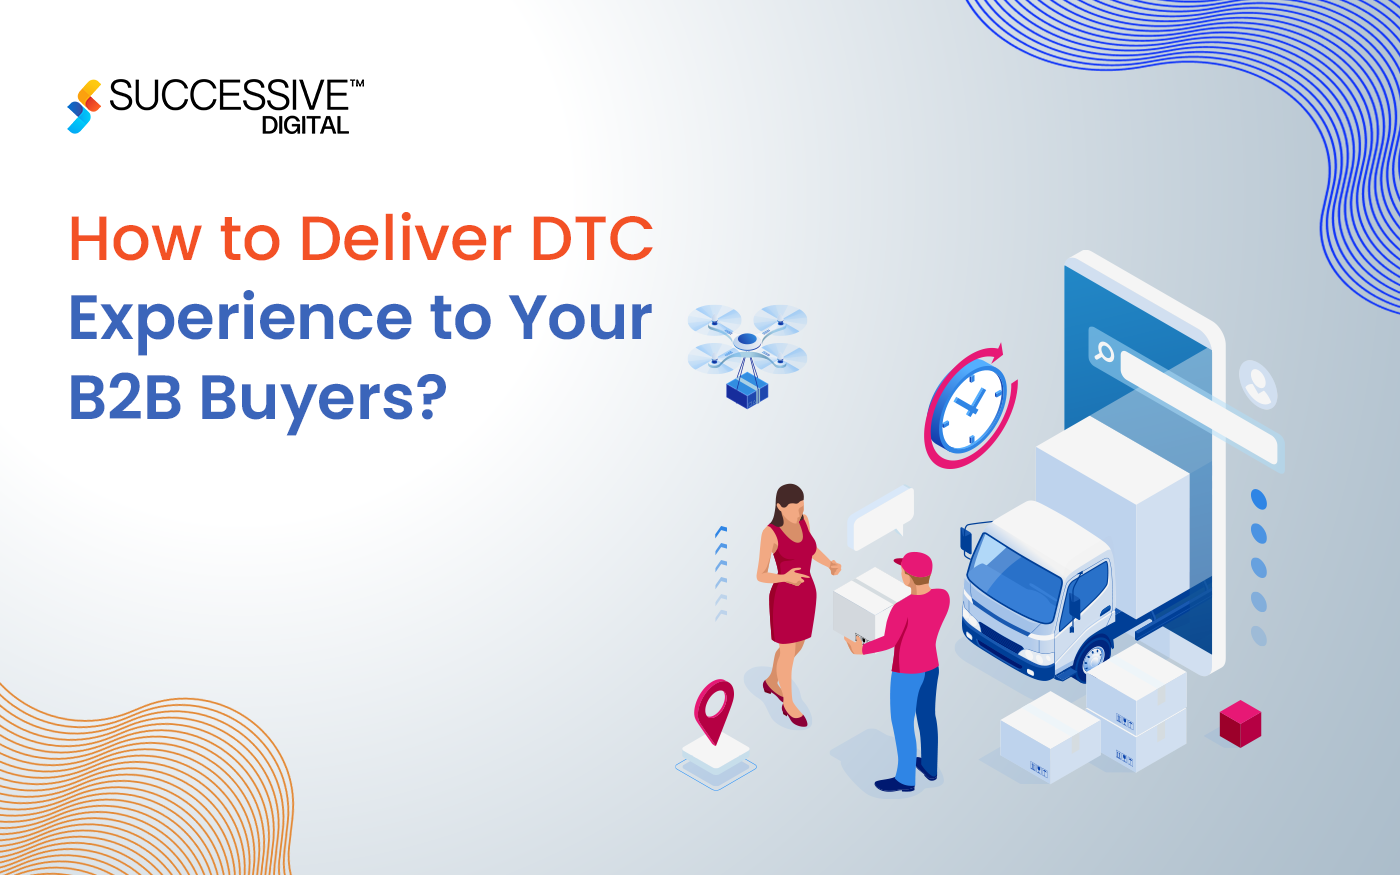 How to Deliver DTC Experience to Your B2B Buyers?